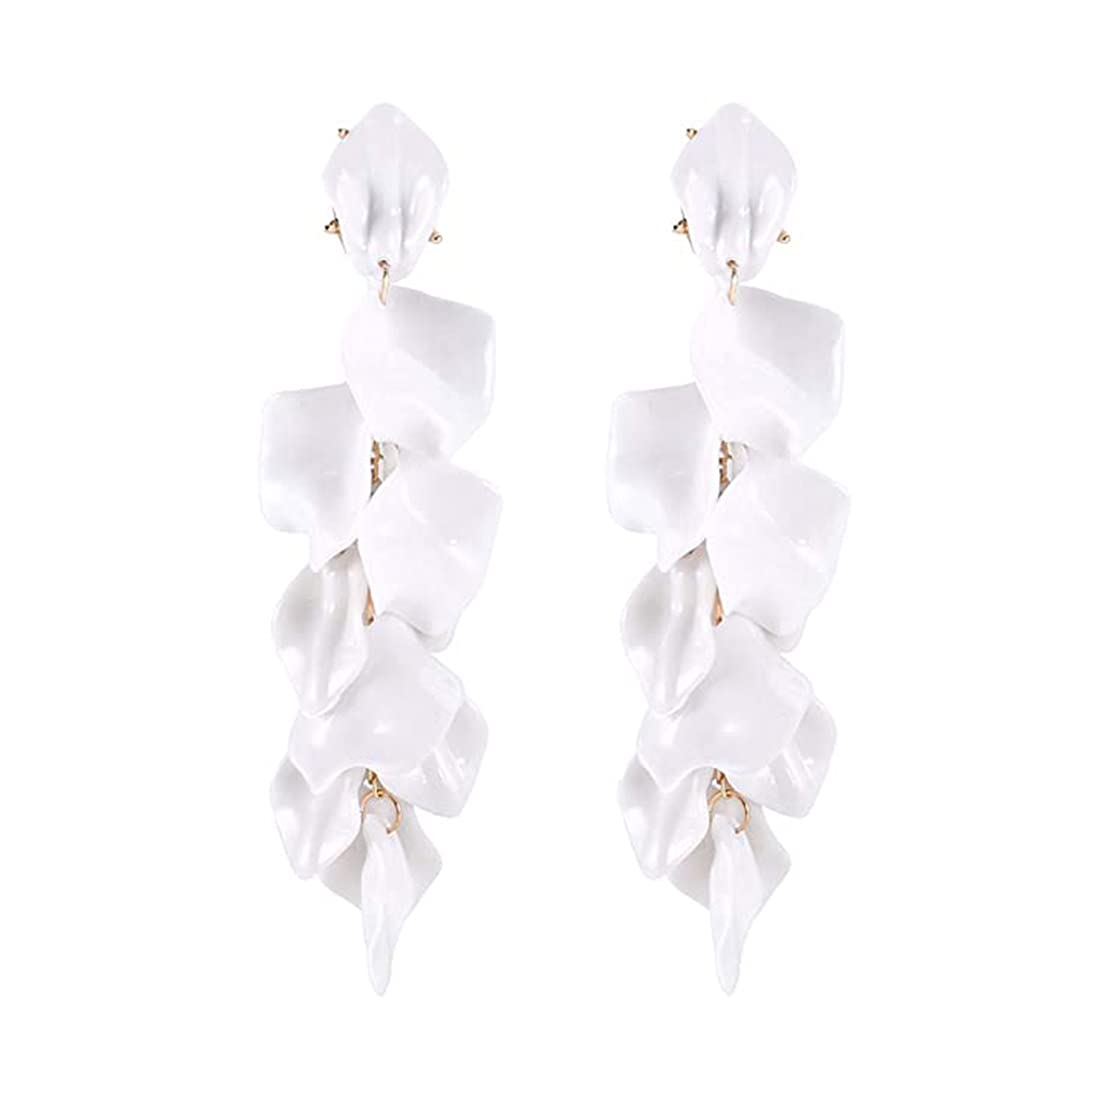 Yellow Chimes Elegant Latest Fashion Gold Plated White Colour Flower Petals Design Dangler Earrings for Women and Girls, Medium (Model Number: YCFJER-PETLDNG-WH)